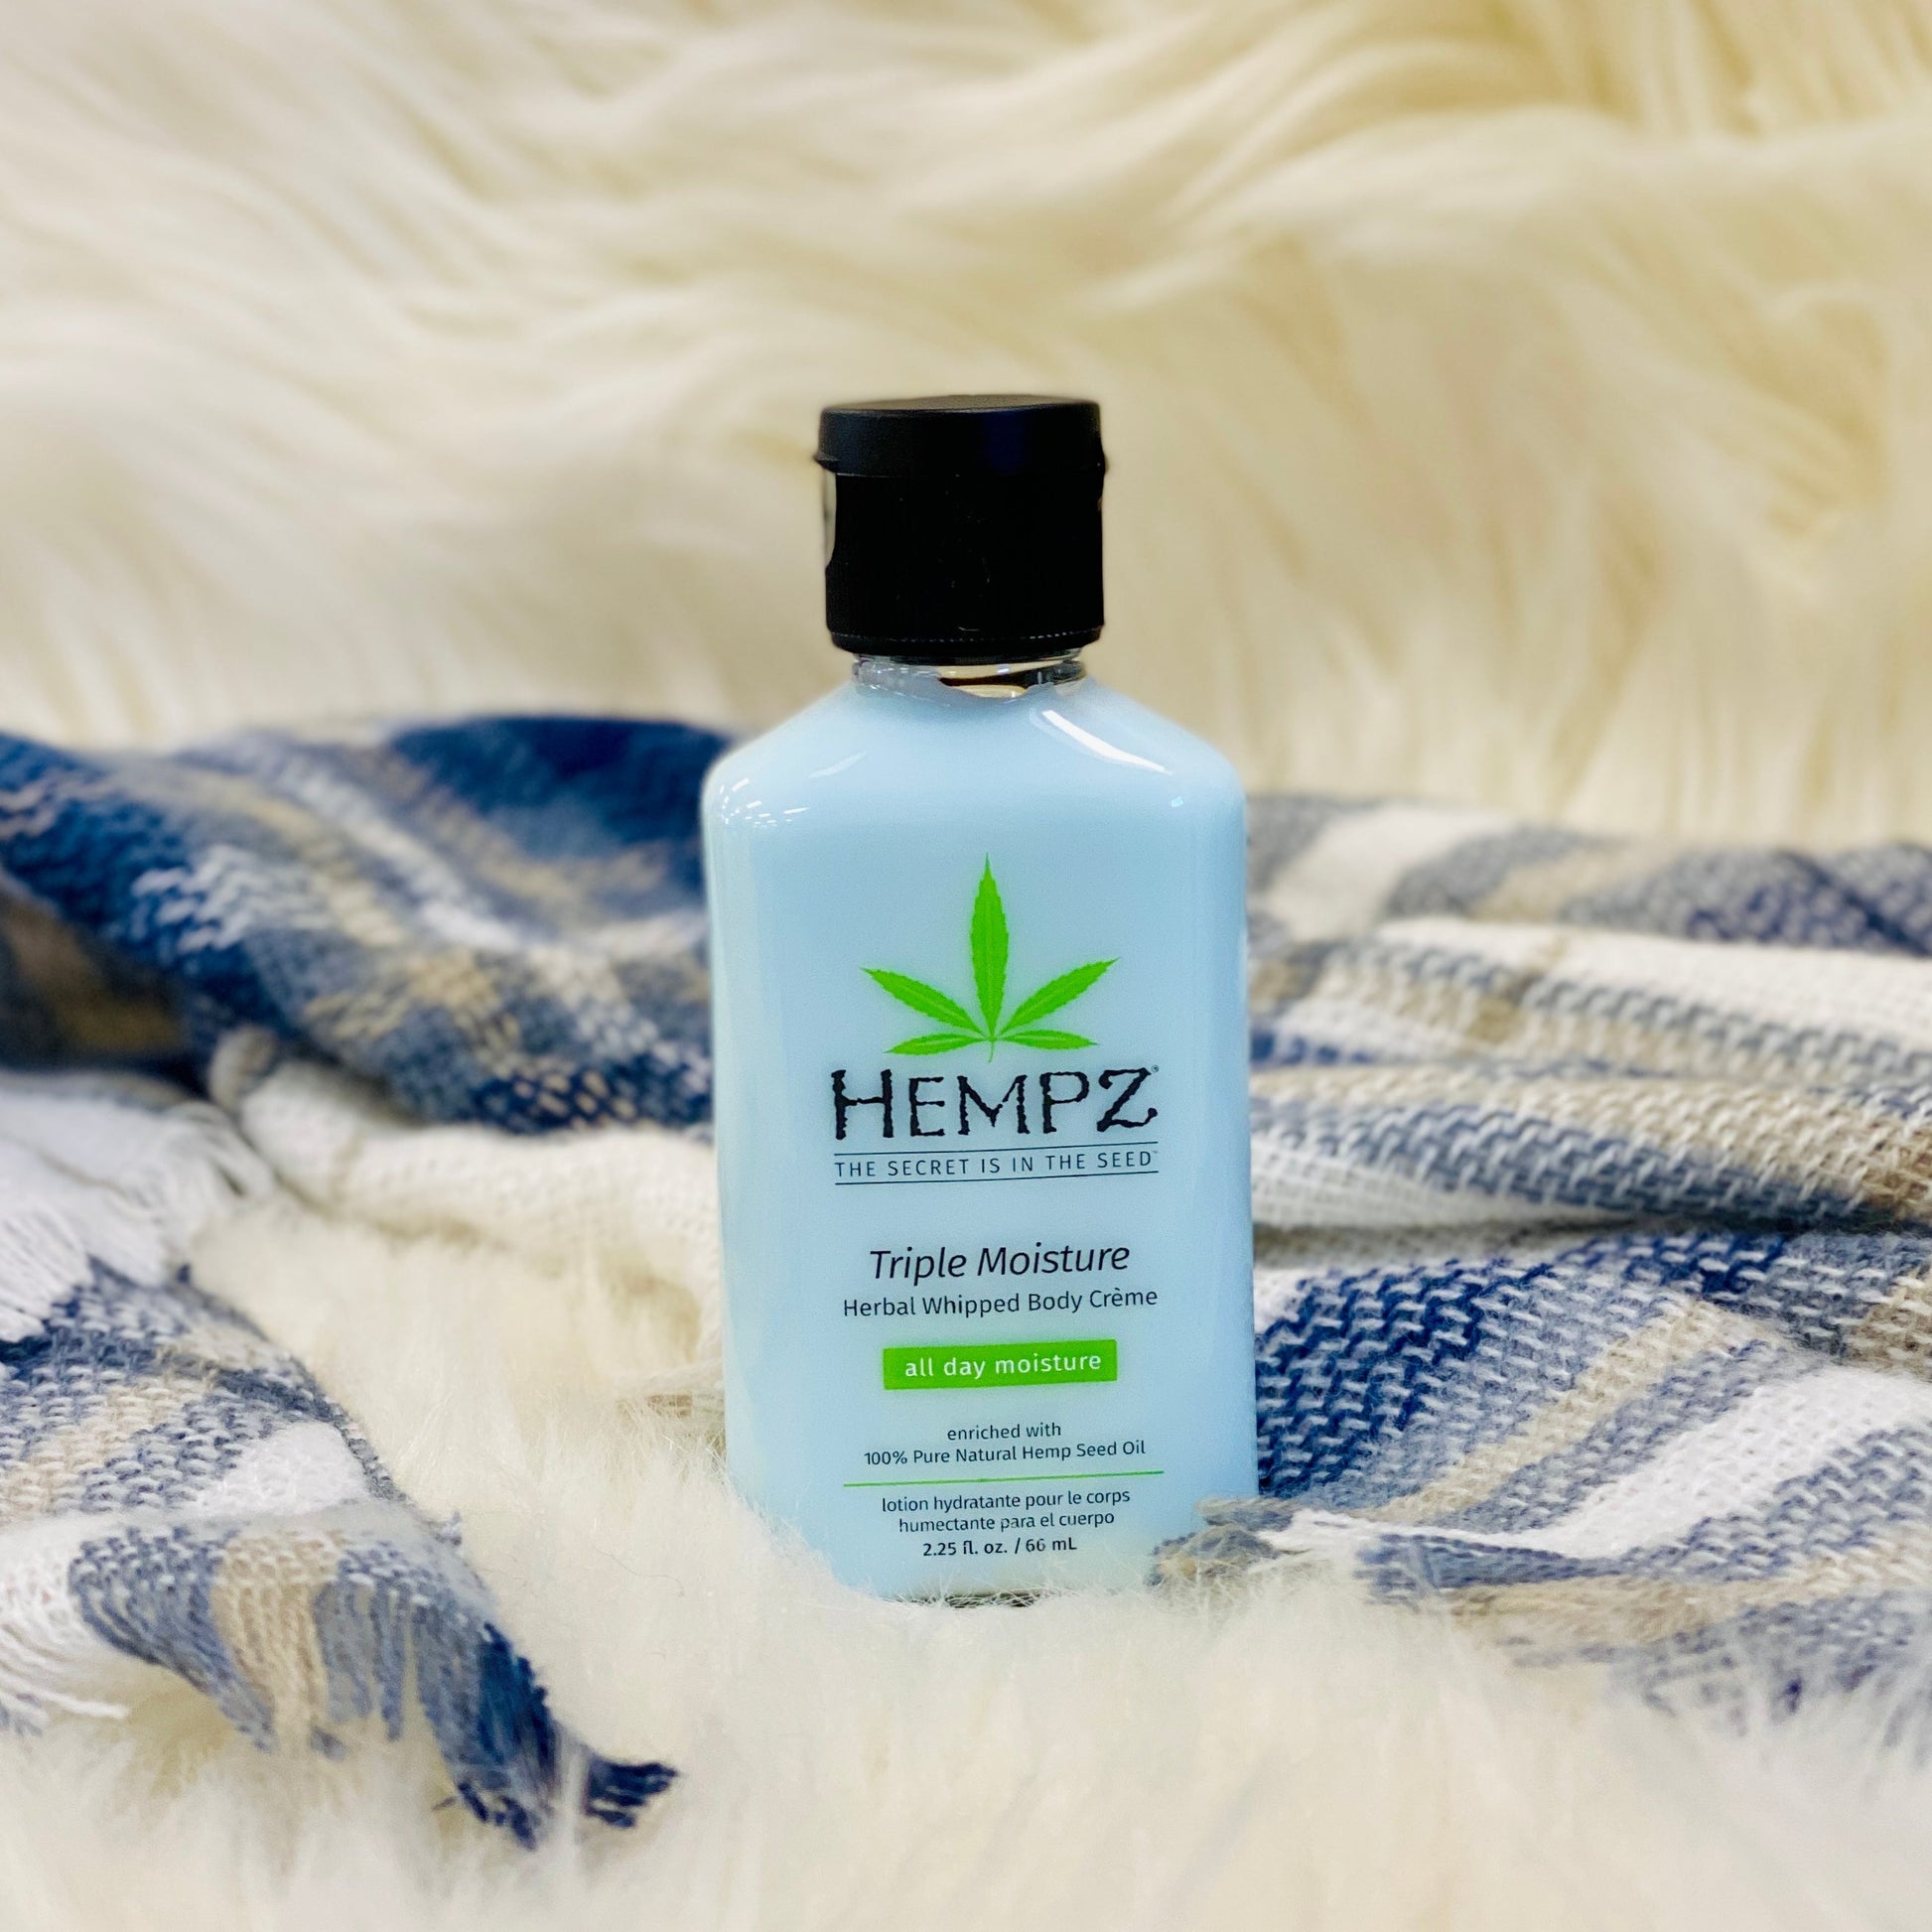 Hempz Travel Size Triple Moisture Whipped Body Creme     Benefits Protects skin and locks in moisture with 100% pure hemp seed oil Helps ward off free radical damage with shea butter Protects and firms skin with hydrating yangu oil Features Paraben-free Cruelty-free Gluten-free 100% Vegan THC-free